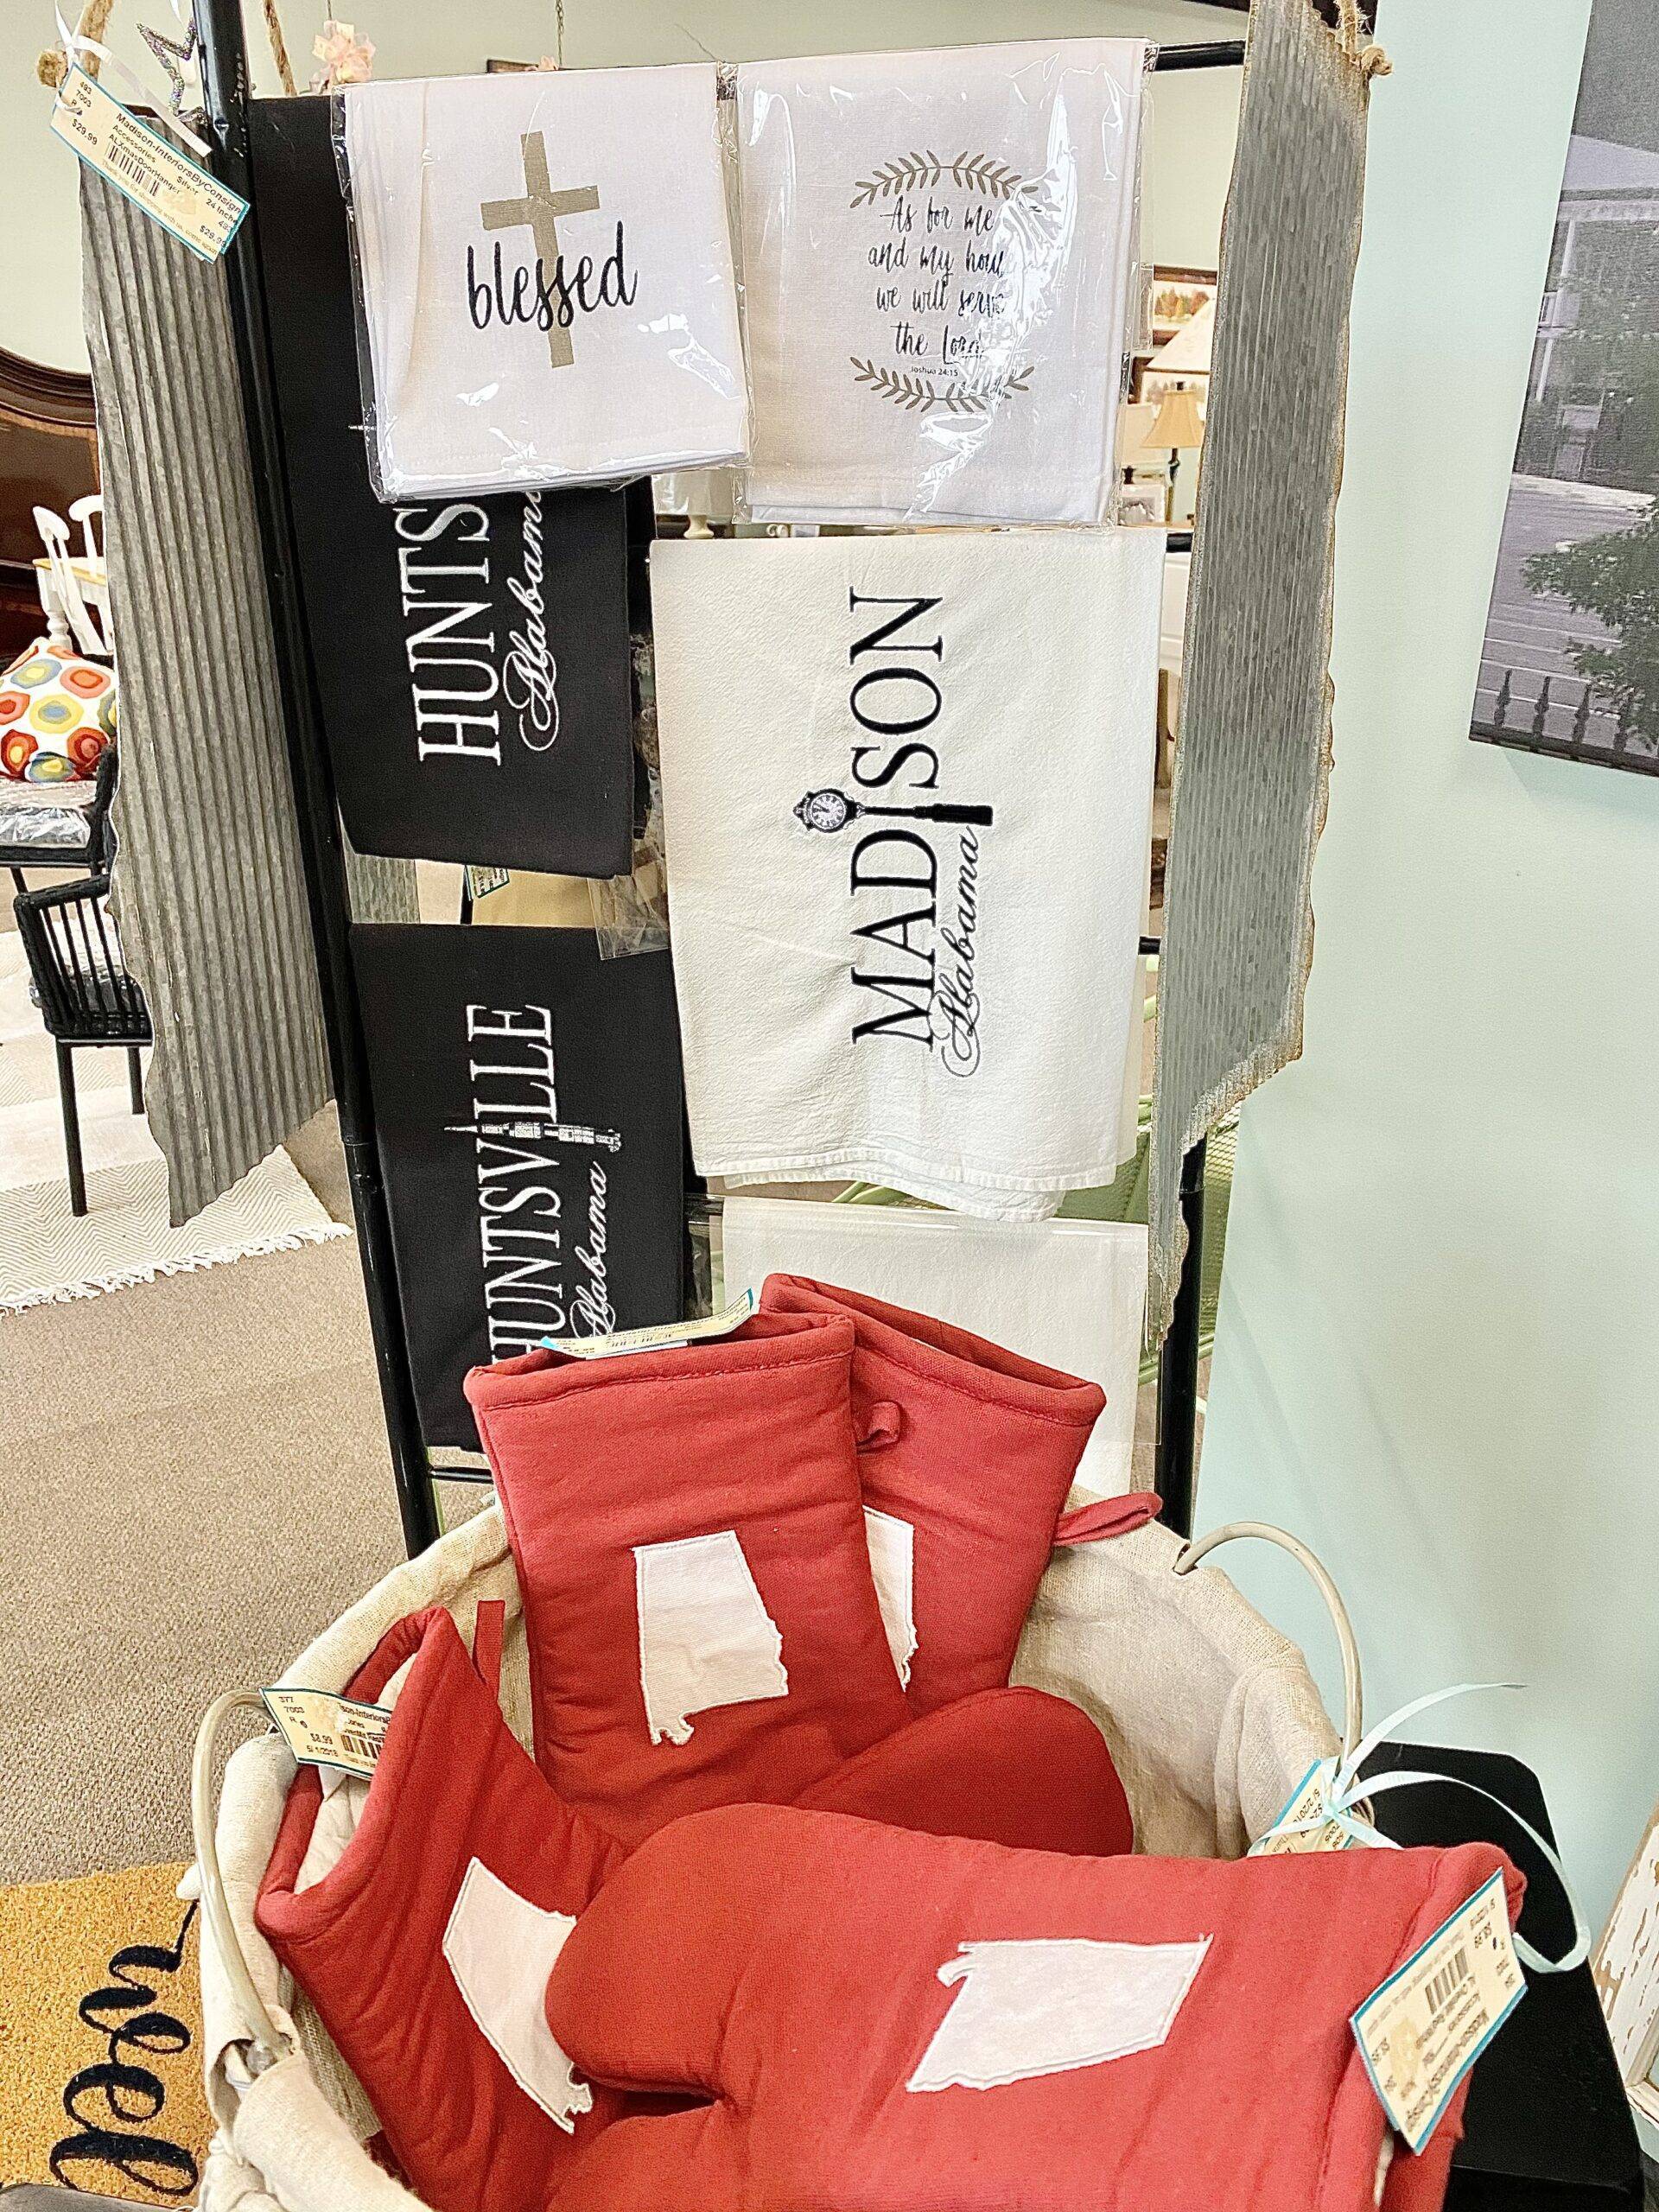 All Things Madison | All About Interiors by Consign's Gift Shop in Madison, Alabama